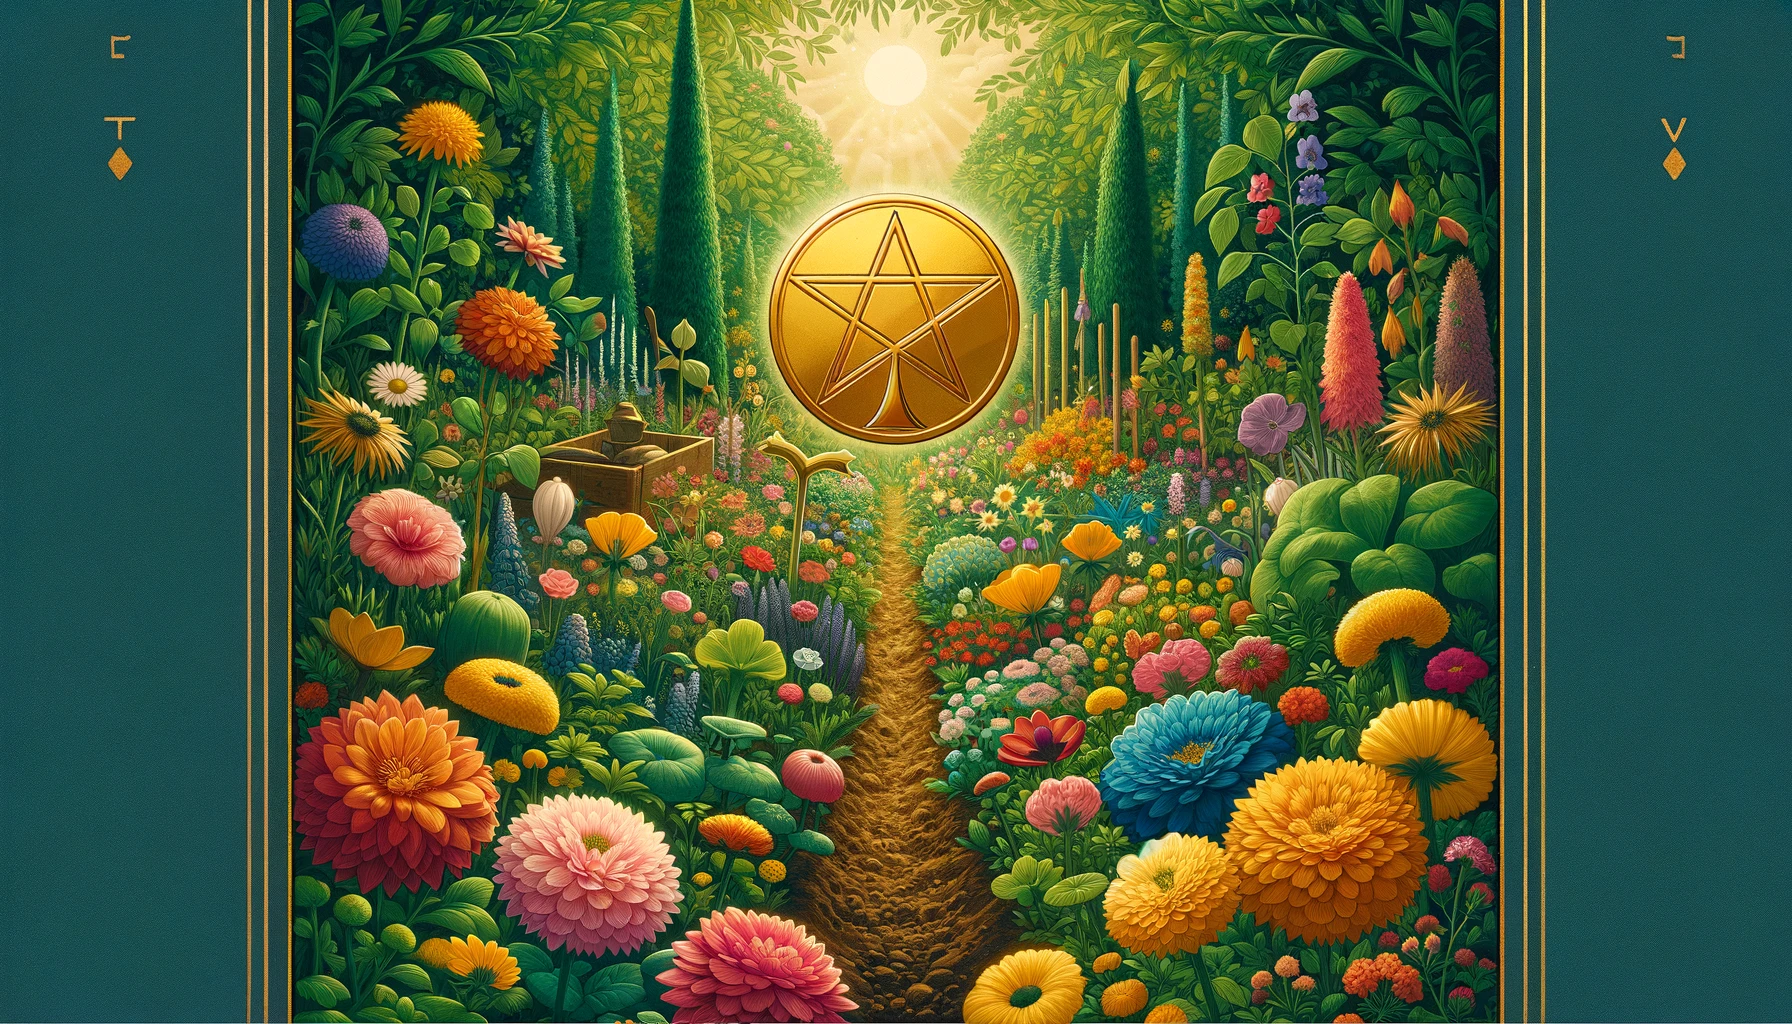 a 169 image capturing the essence of the Ace of Pentacles from the Tarots Minor Arcana Depict a lush vibrant garden filled with a variety of blooming flowers representing fertil